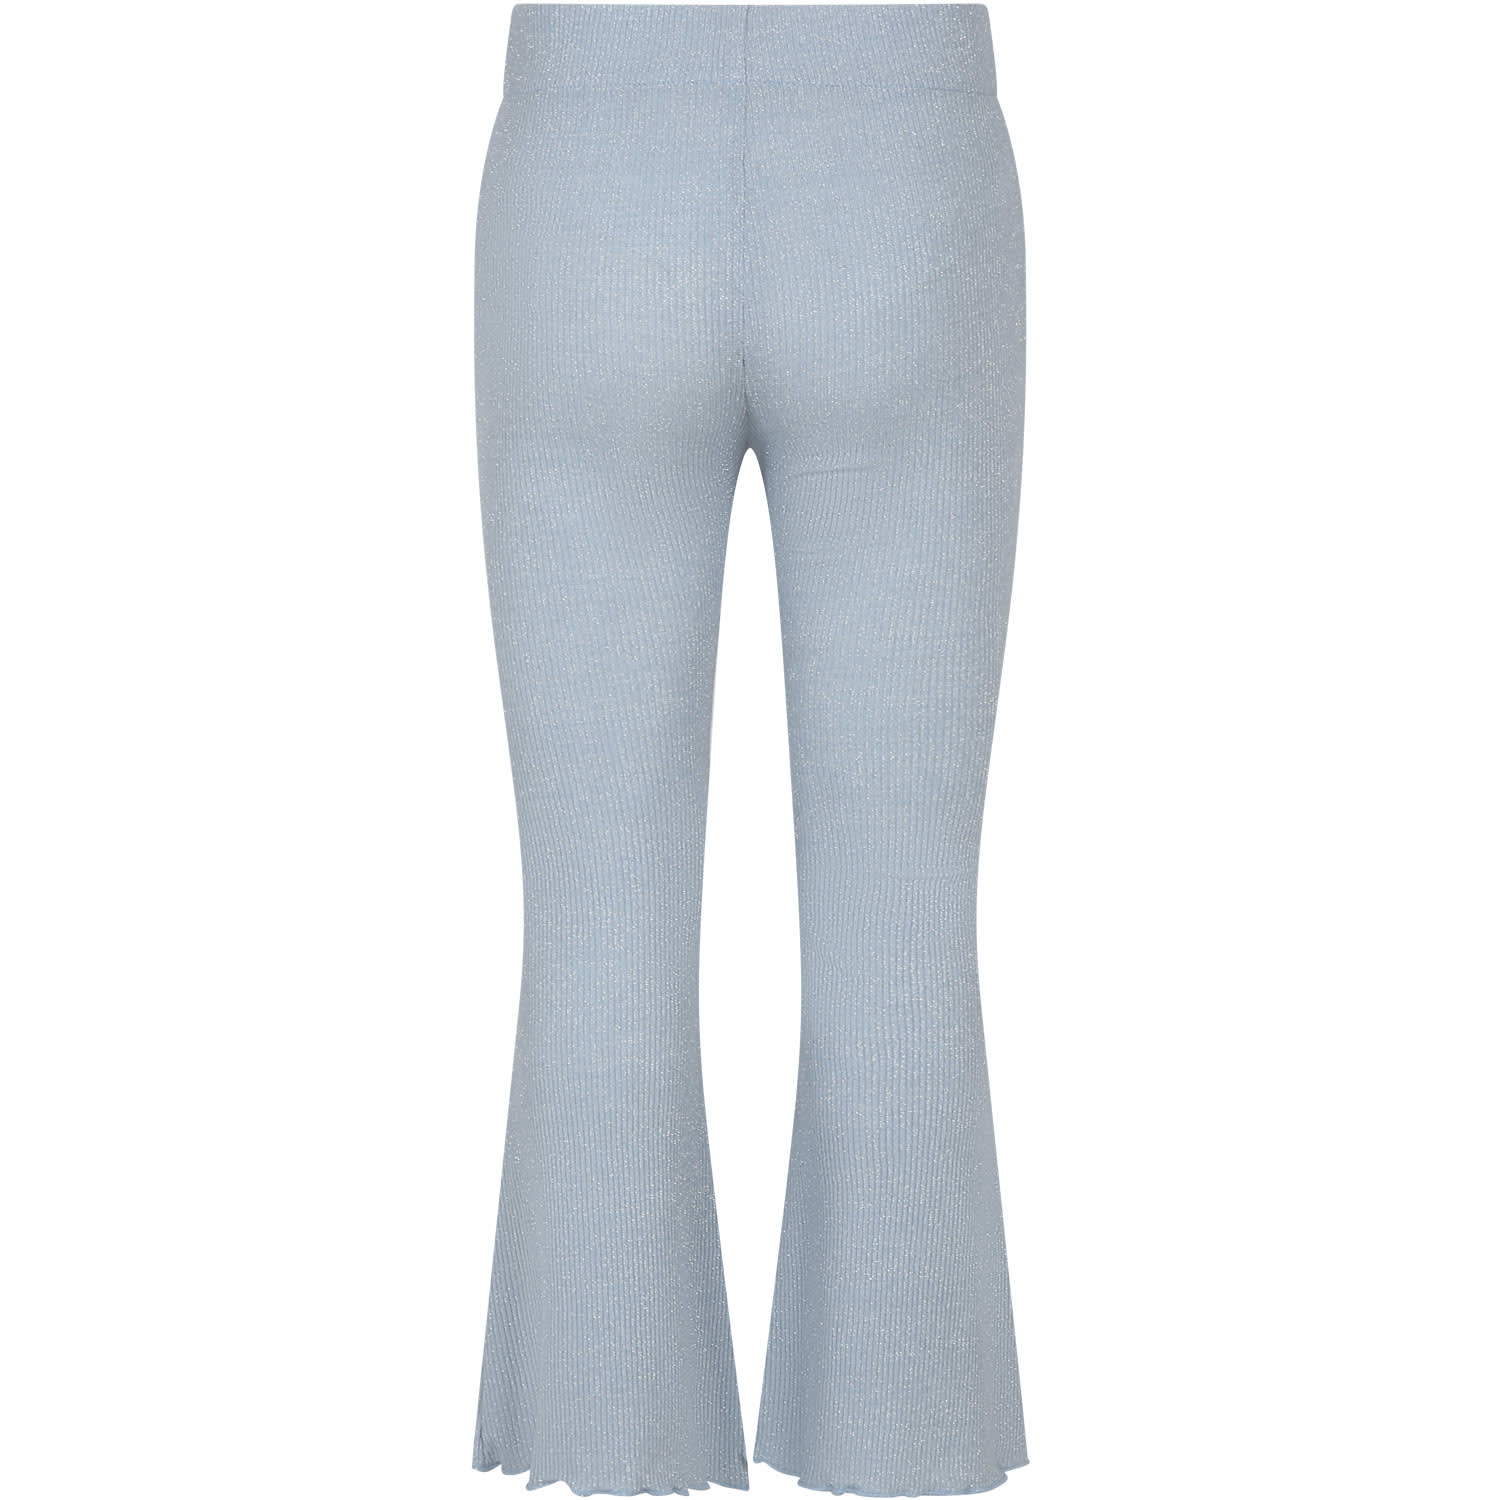 Shop Caffe' D'orzo Light Blue Trousers For Girl With Lurex